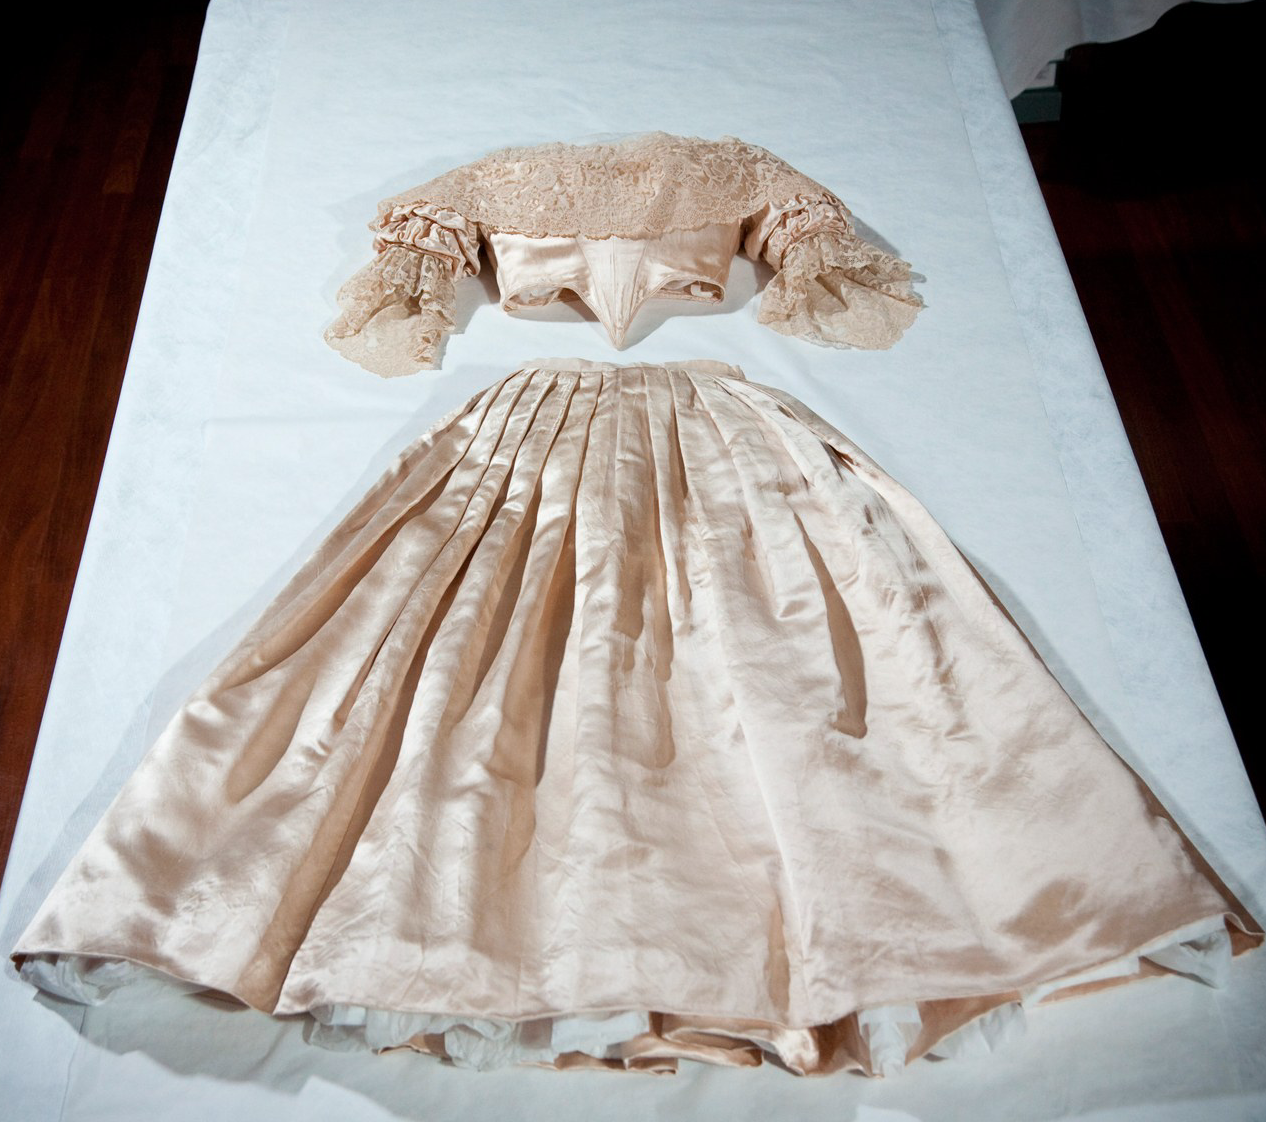 Queen Victoria's wedding dress on a table